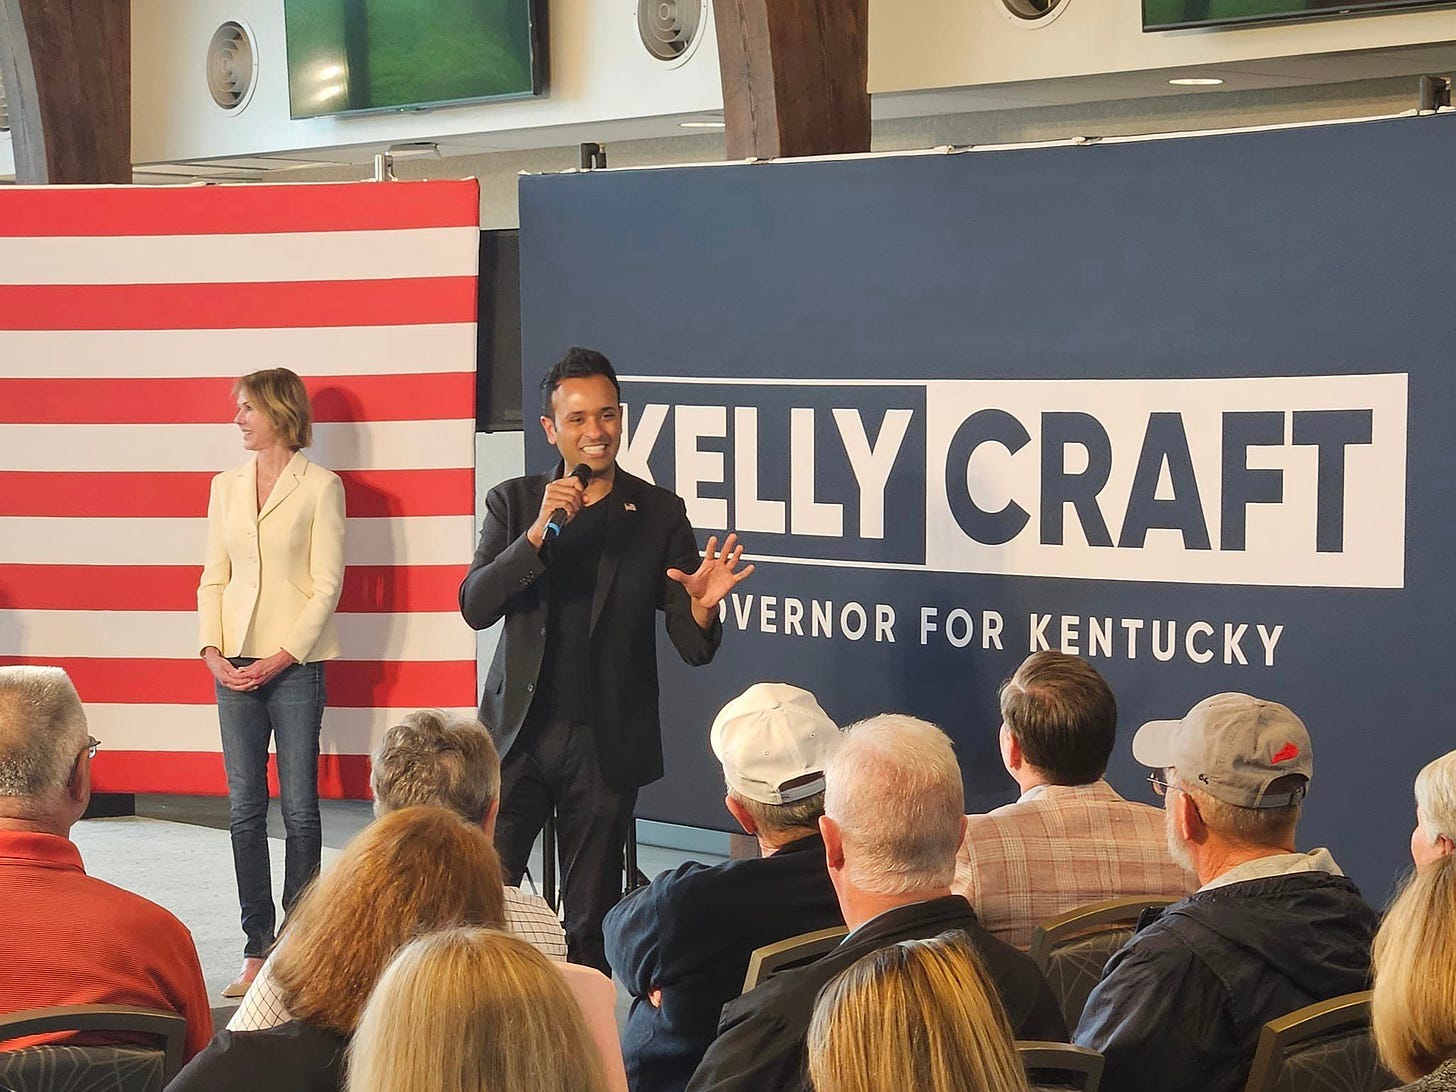 May be an image of 9 people and text that says 'KELLY CRAFT 'VERNOR FOR KENTUCKY'